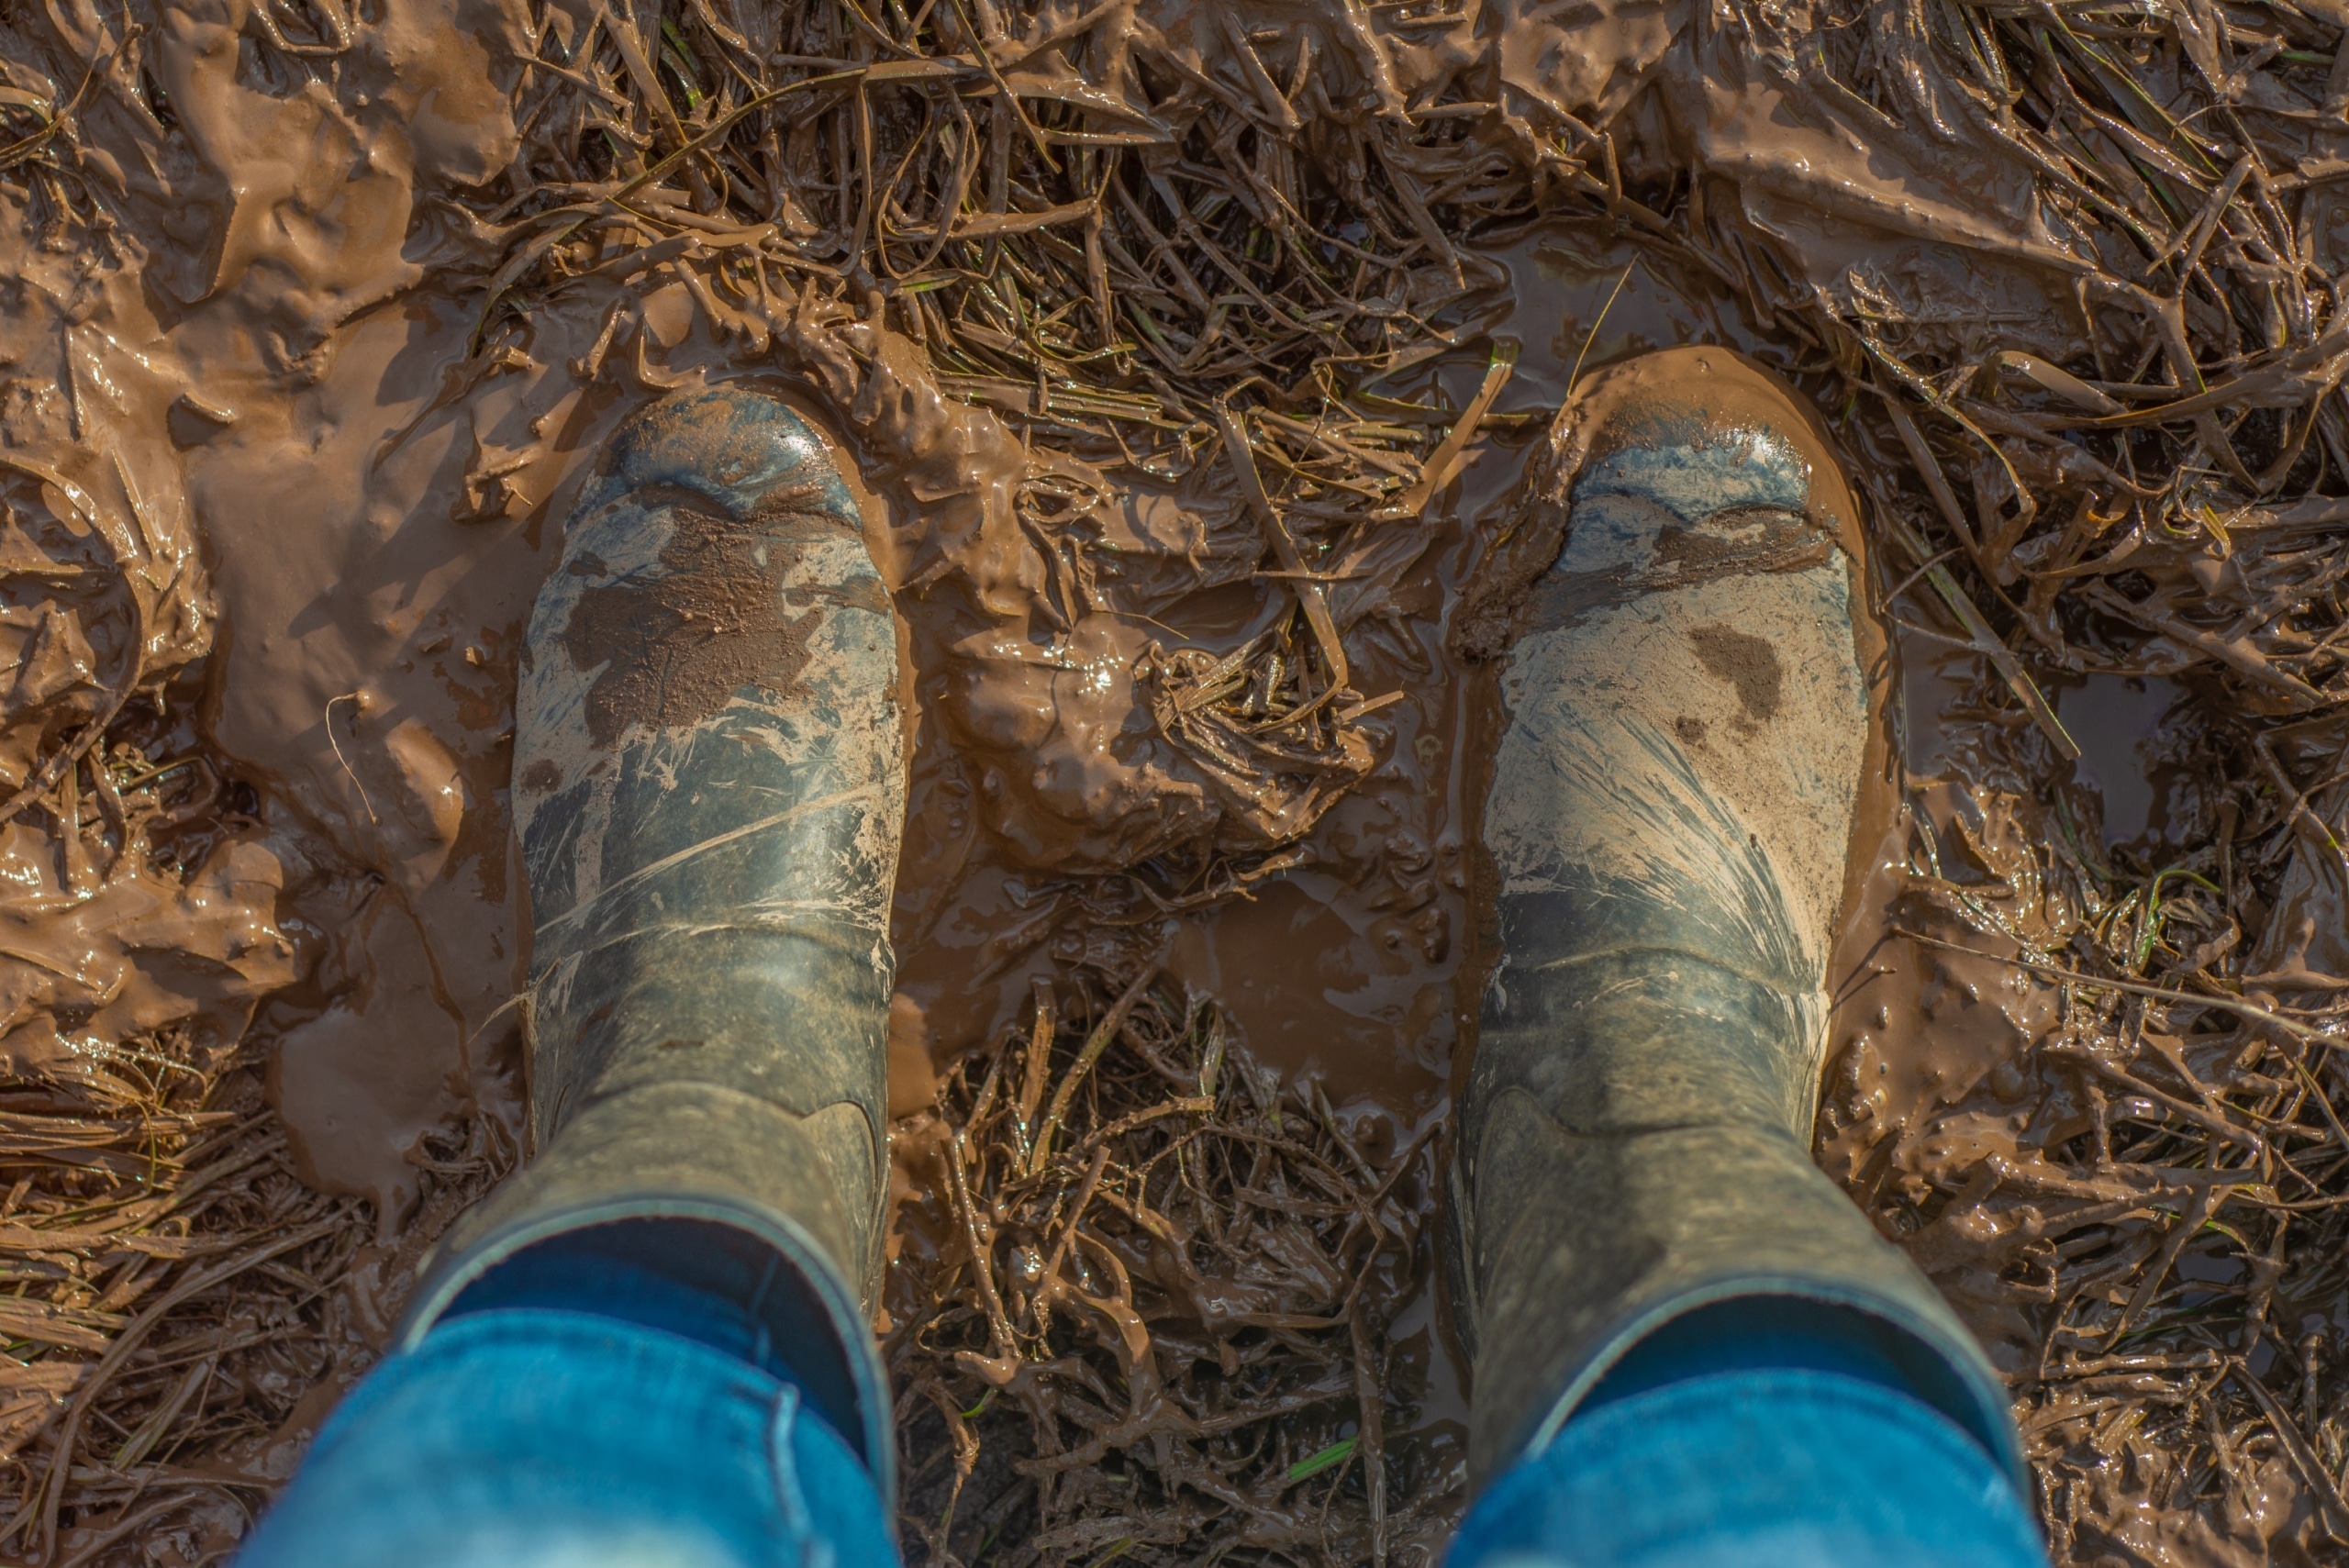 Wellington boots covered in mud